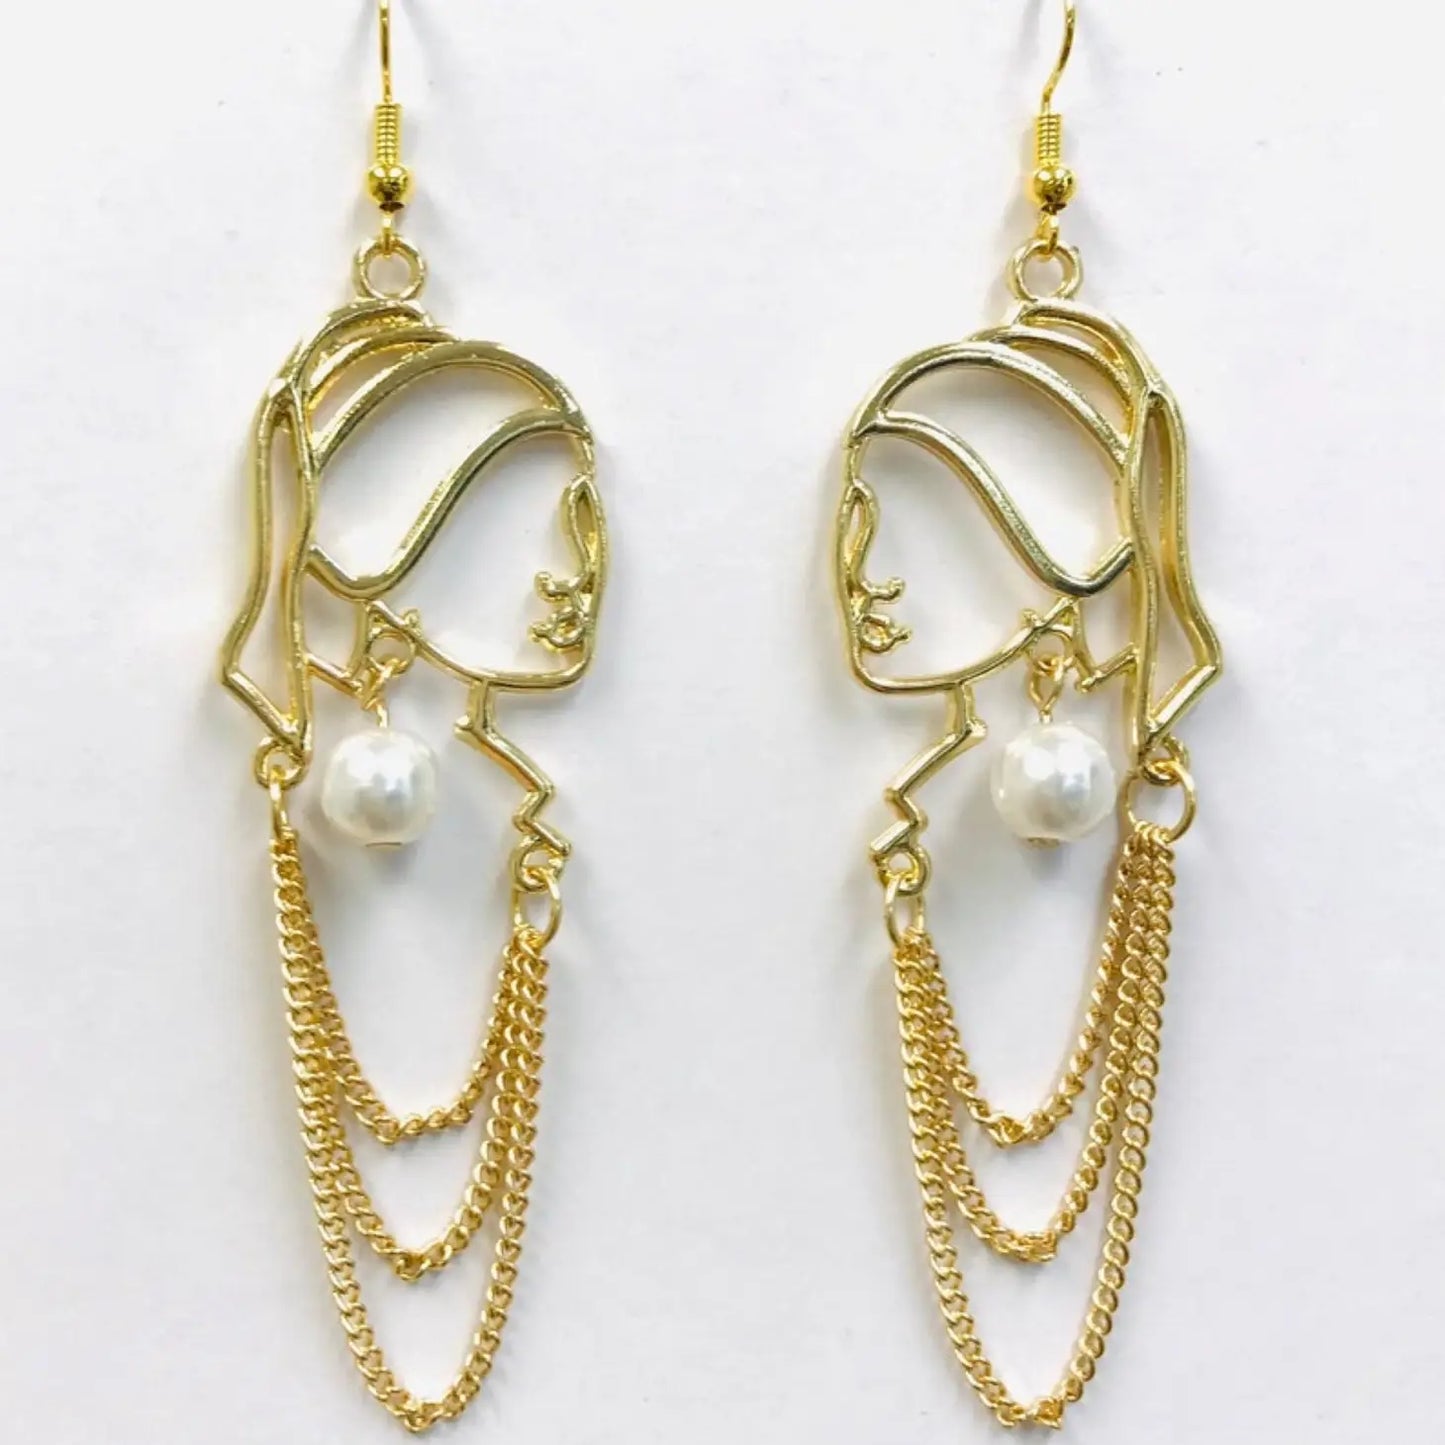 E159 - Girl With A Pearl Earring - Gold Earrings - Jewelry  from Nihao jewelry